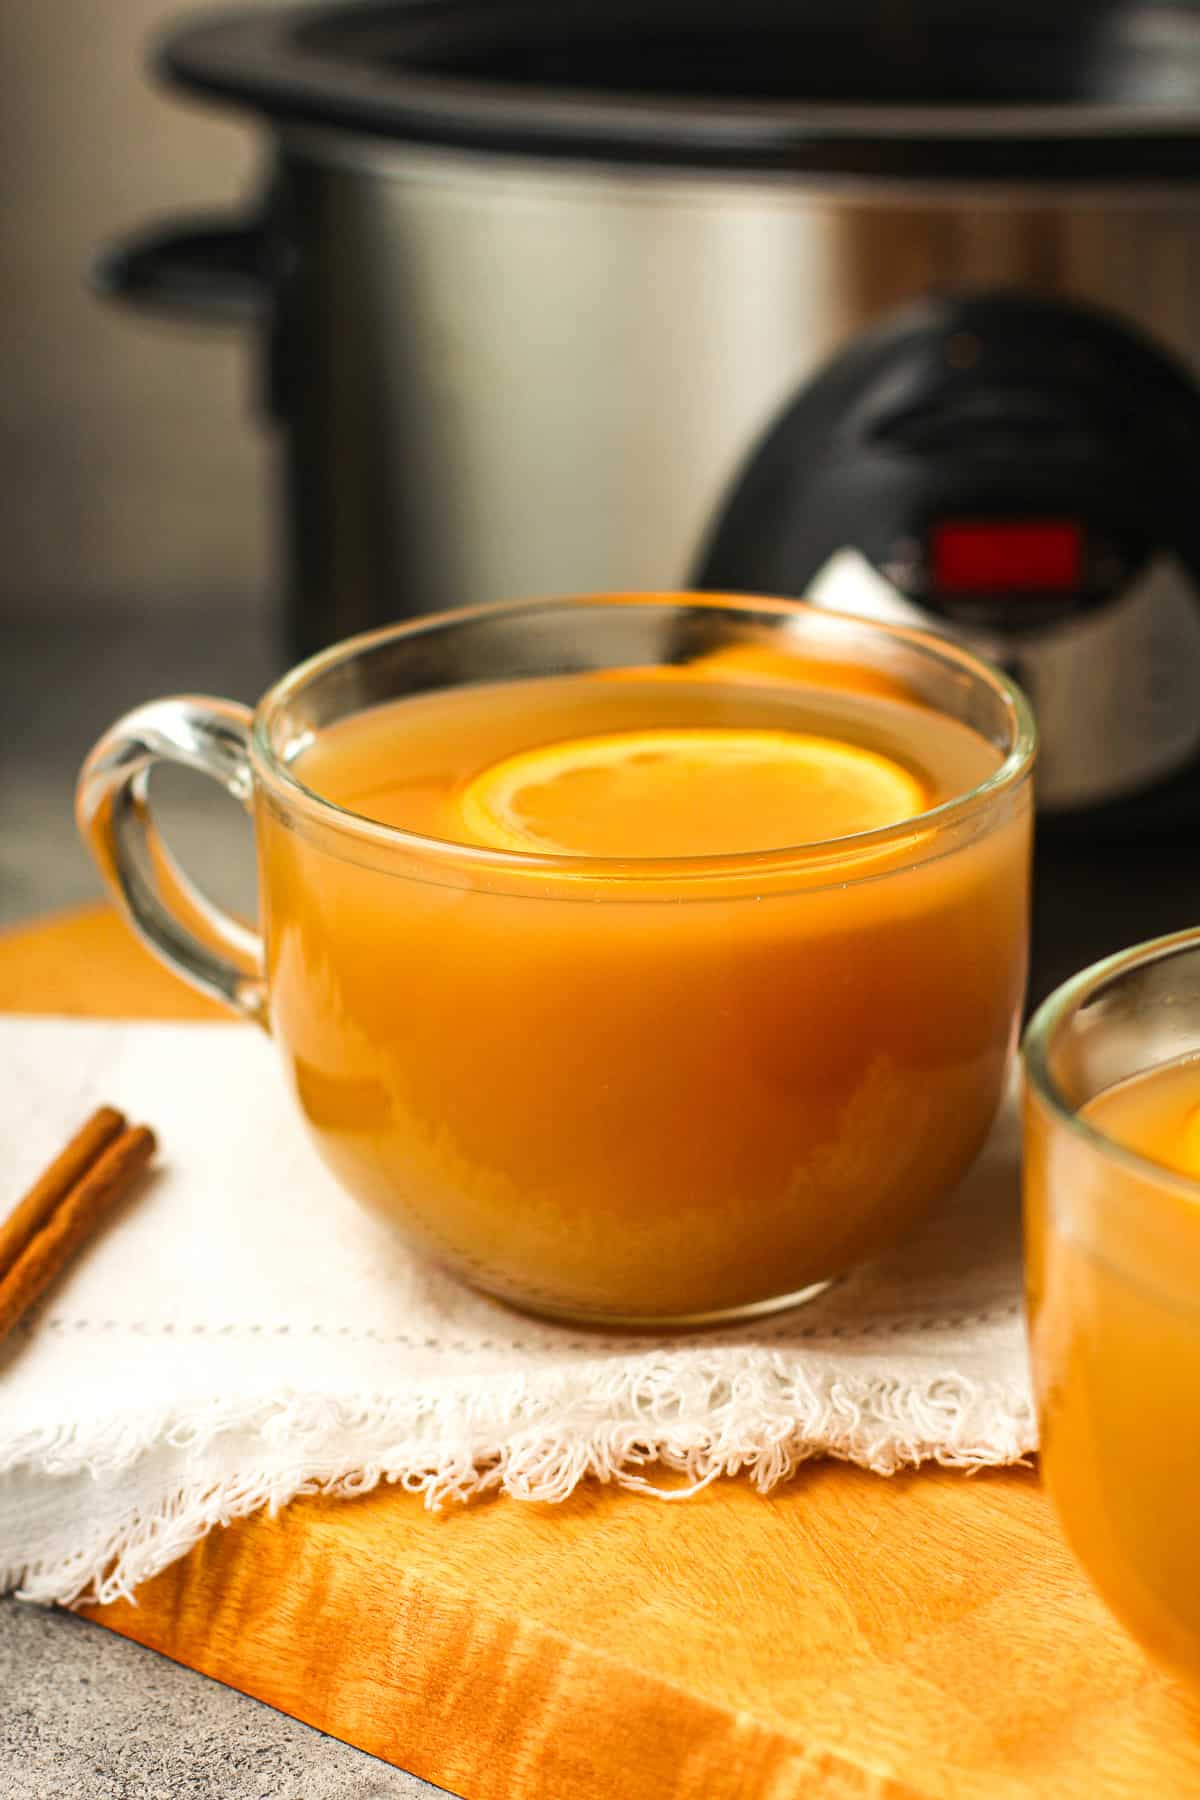 Side view of a mug of cider in front of a crockpot.